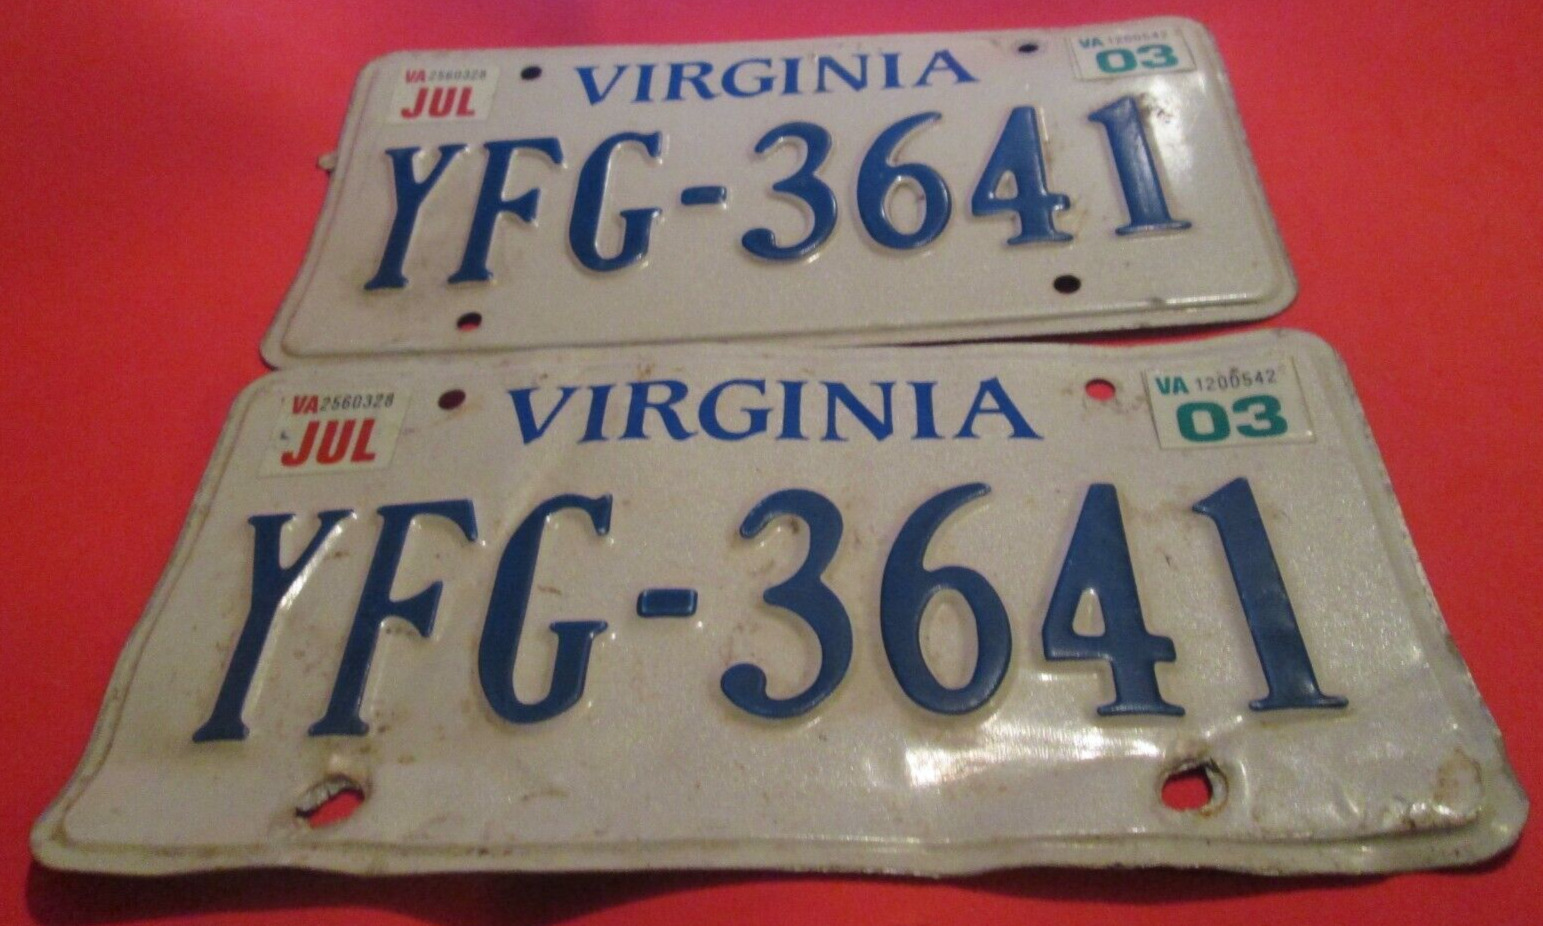 VINTAGE PAIR OF US VIRGINIA LICENSE PLATES WITH 2003 STICKER YFG 3641 MOR LISTED